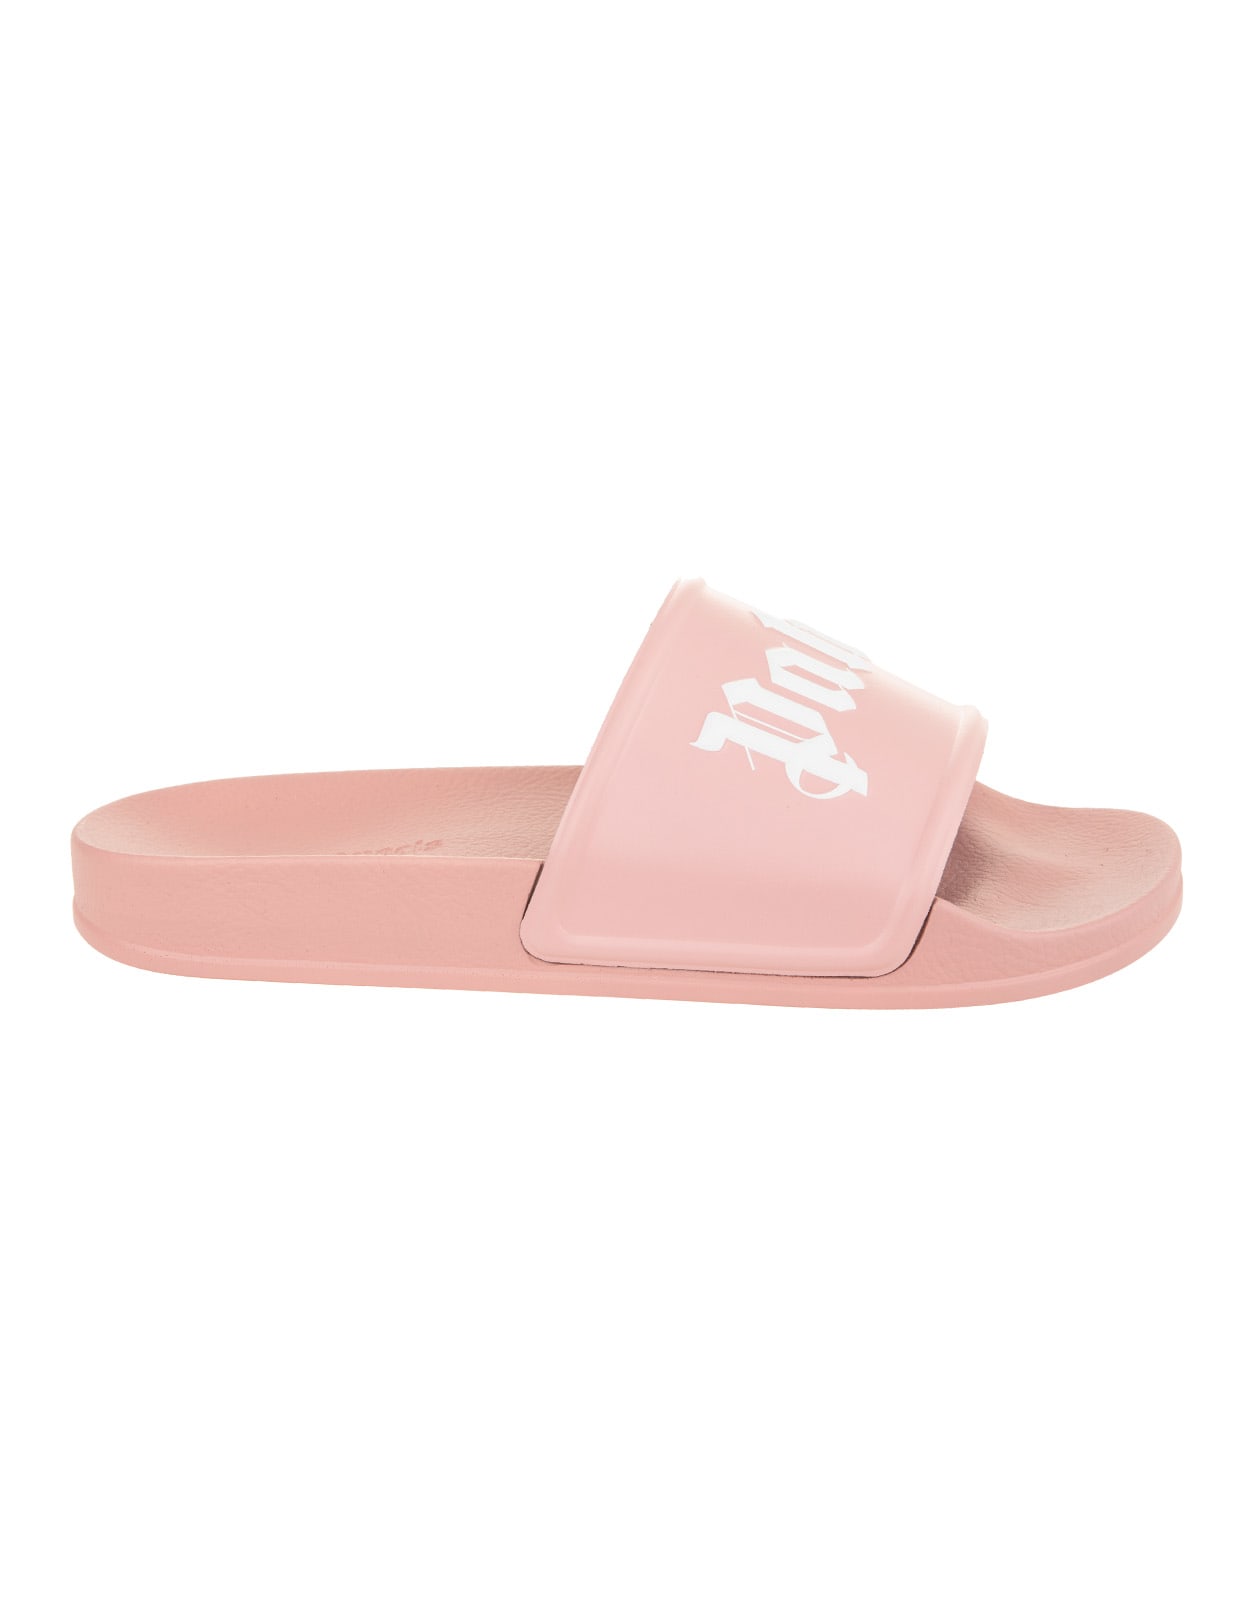 Palm Angels Woman Matte Light Pink Rubber Slipper With White Logo